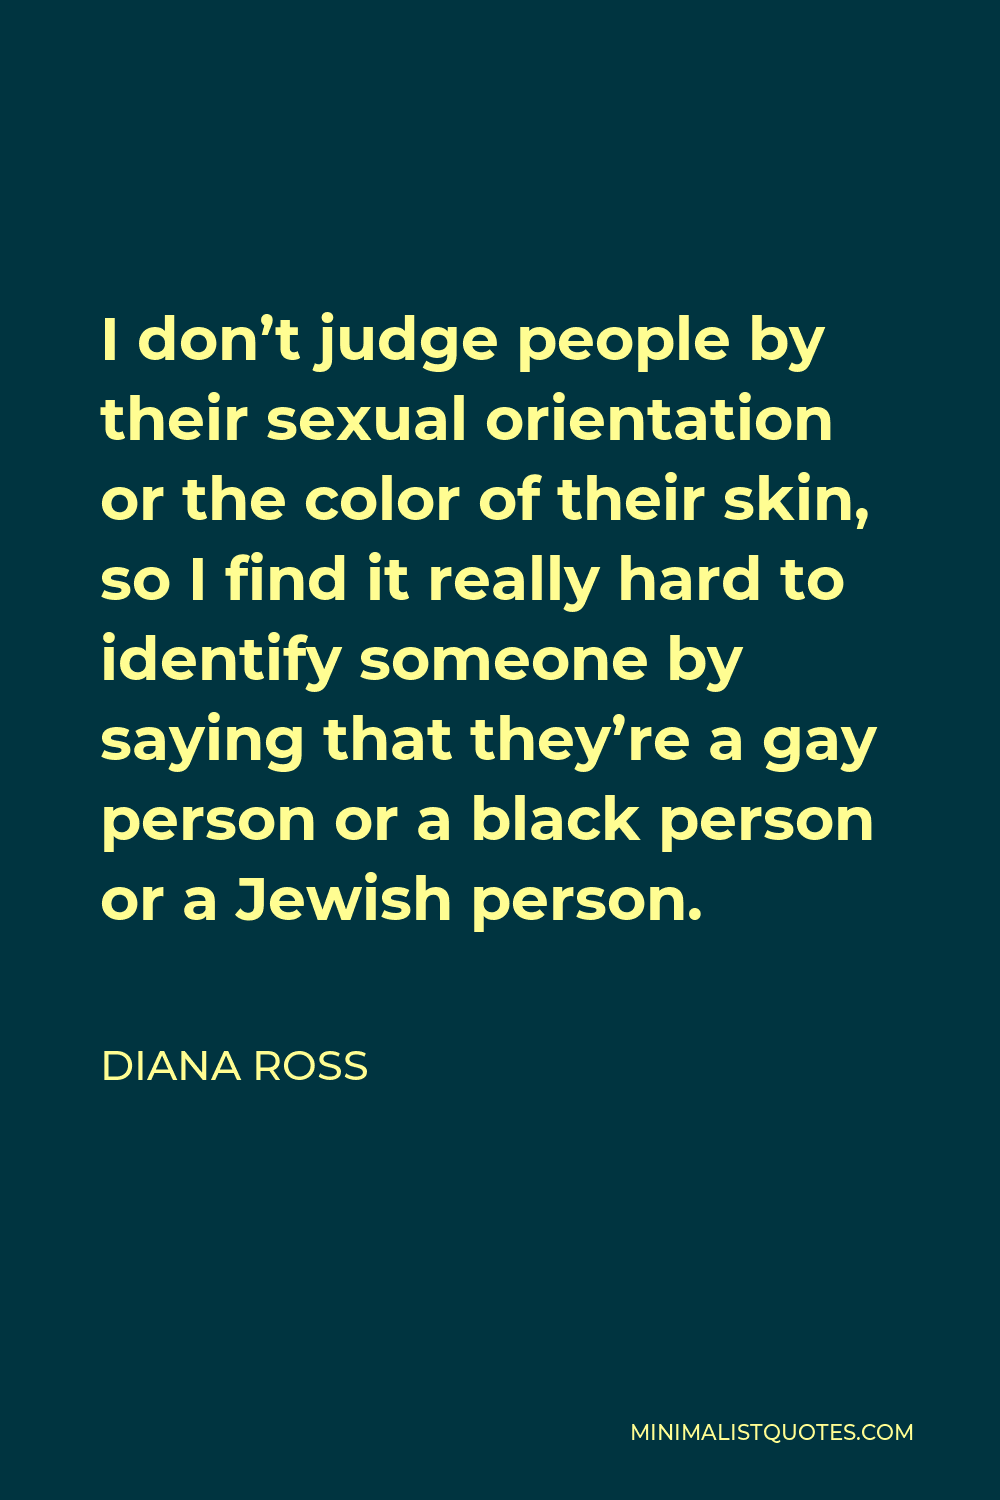 Diana Ross Quote I Dont Judge People By Their Sexual Orientation Or The Color Of Their Skin 